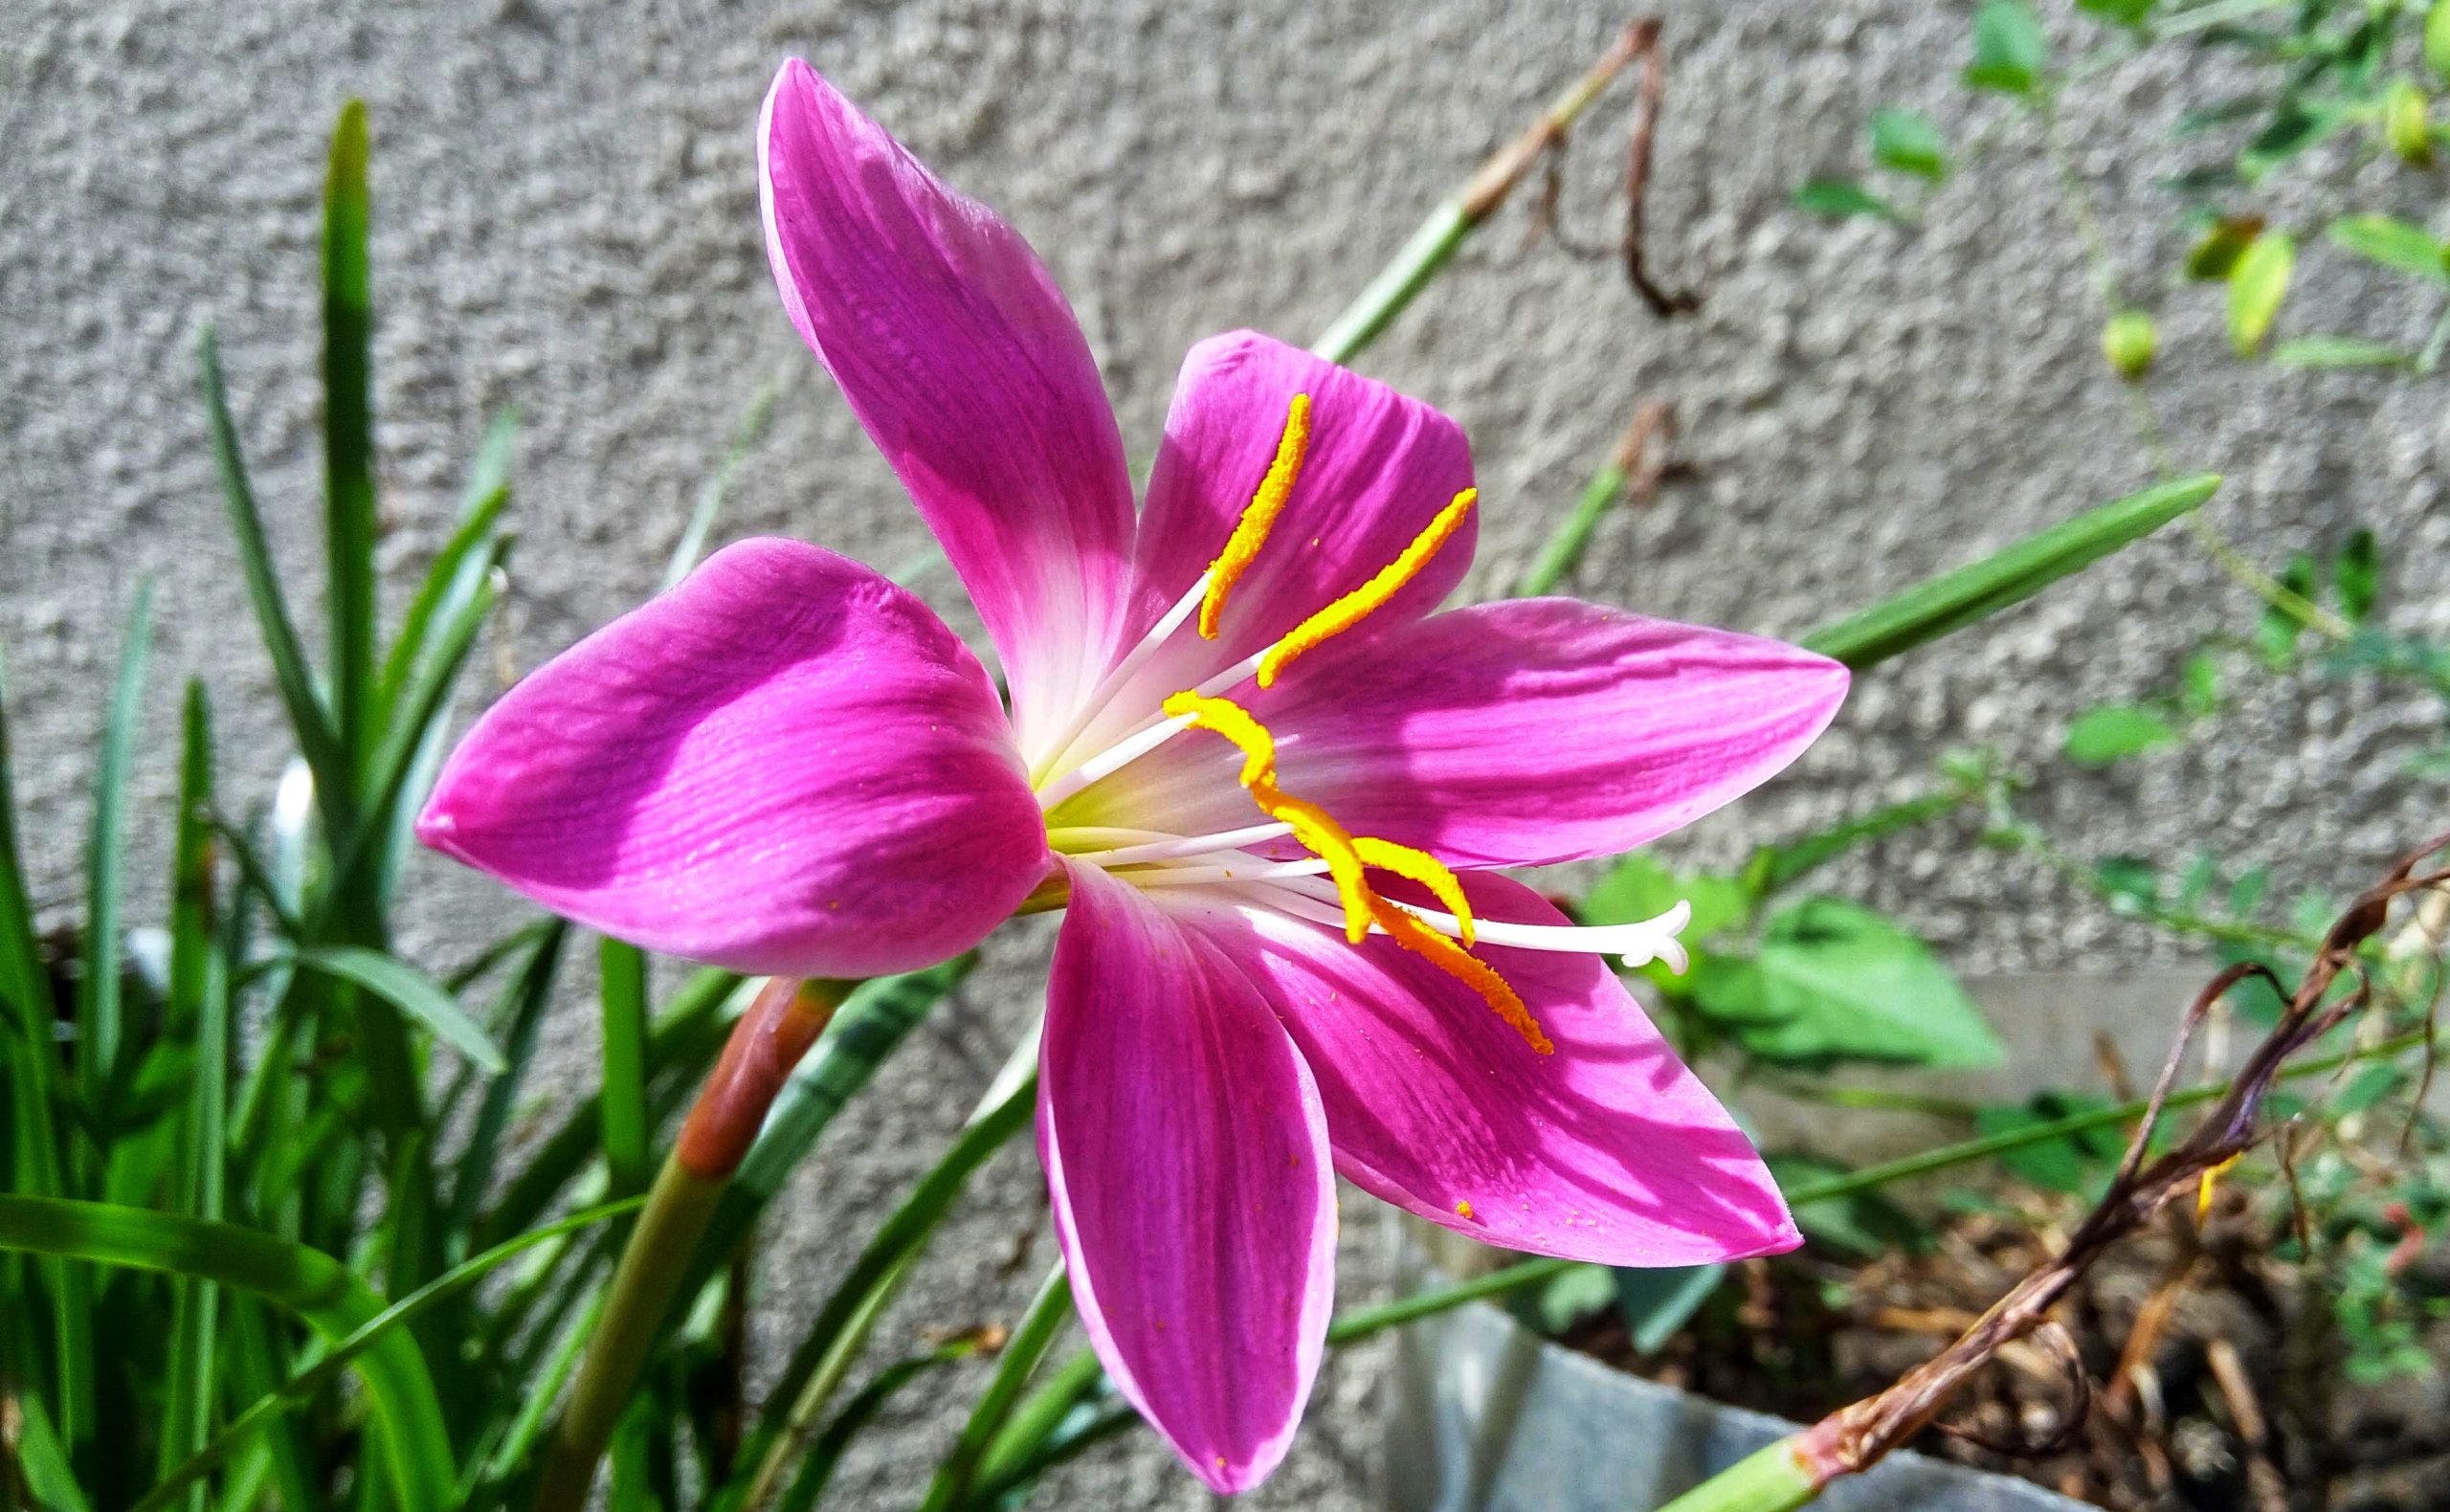 Glorious pink lily